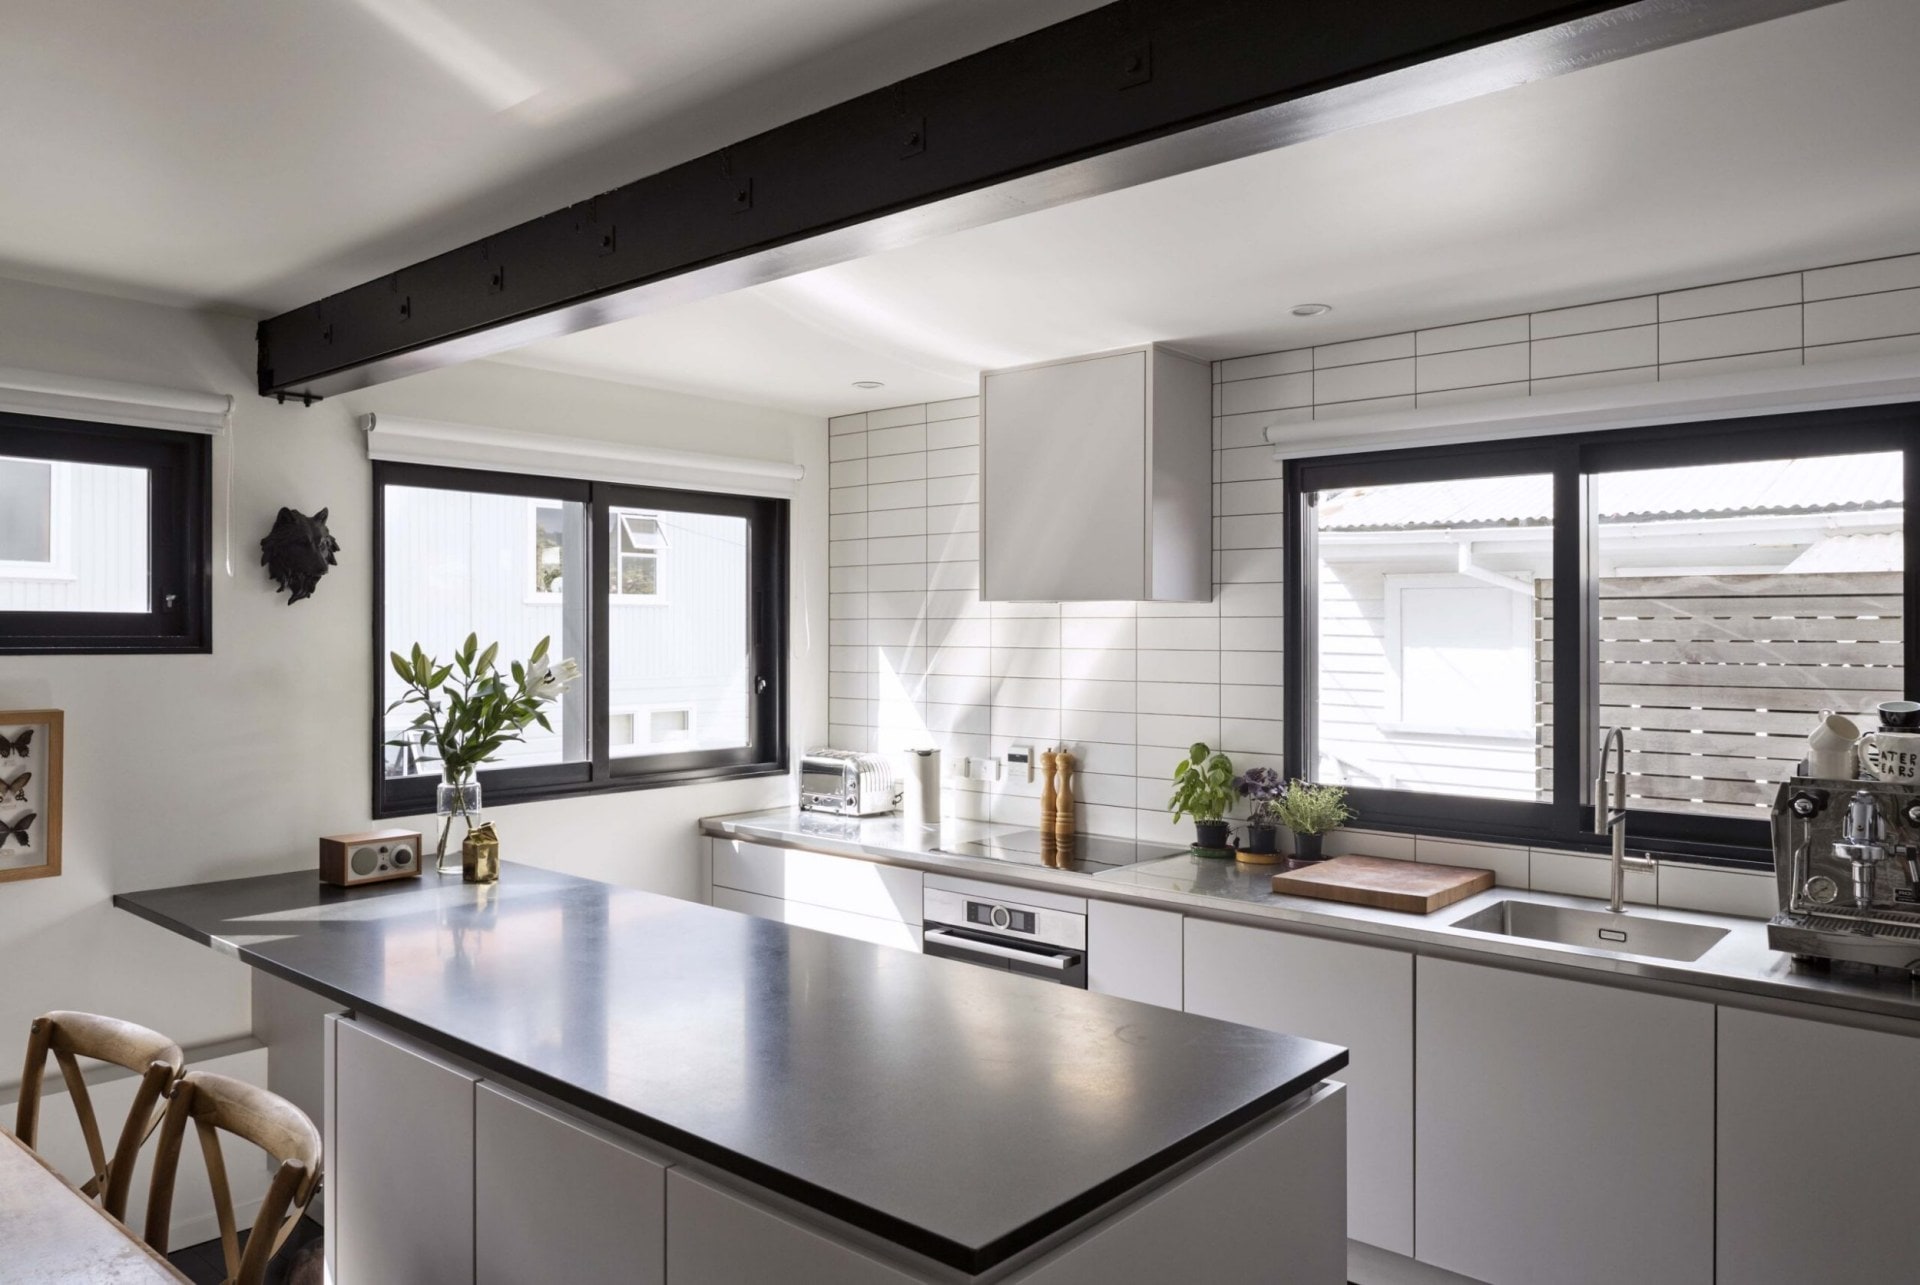 A kitchen with white walls, white drawers with black benchtops, white subway tiles and and a black metal ceiling beam